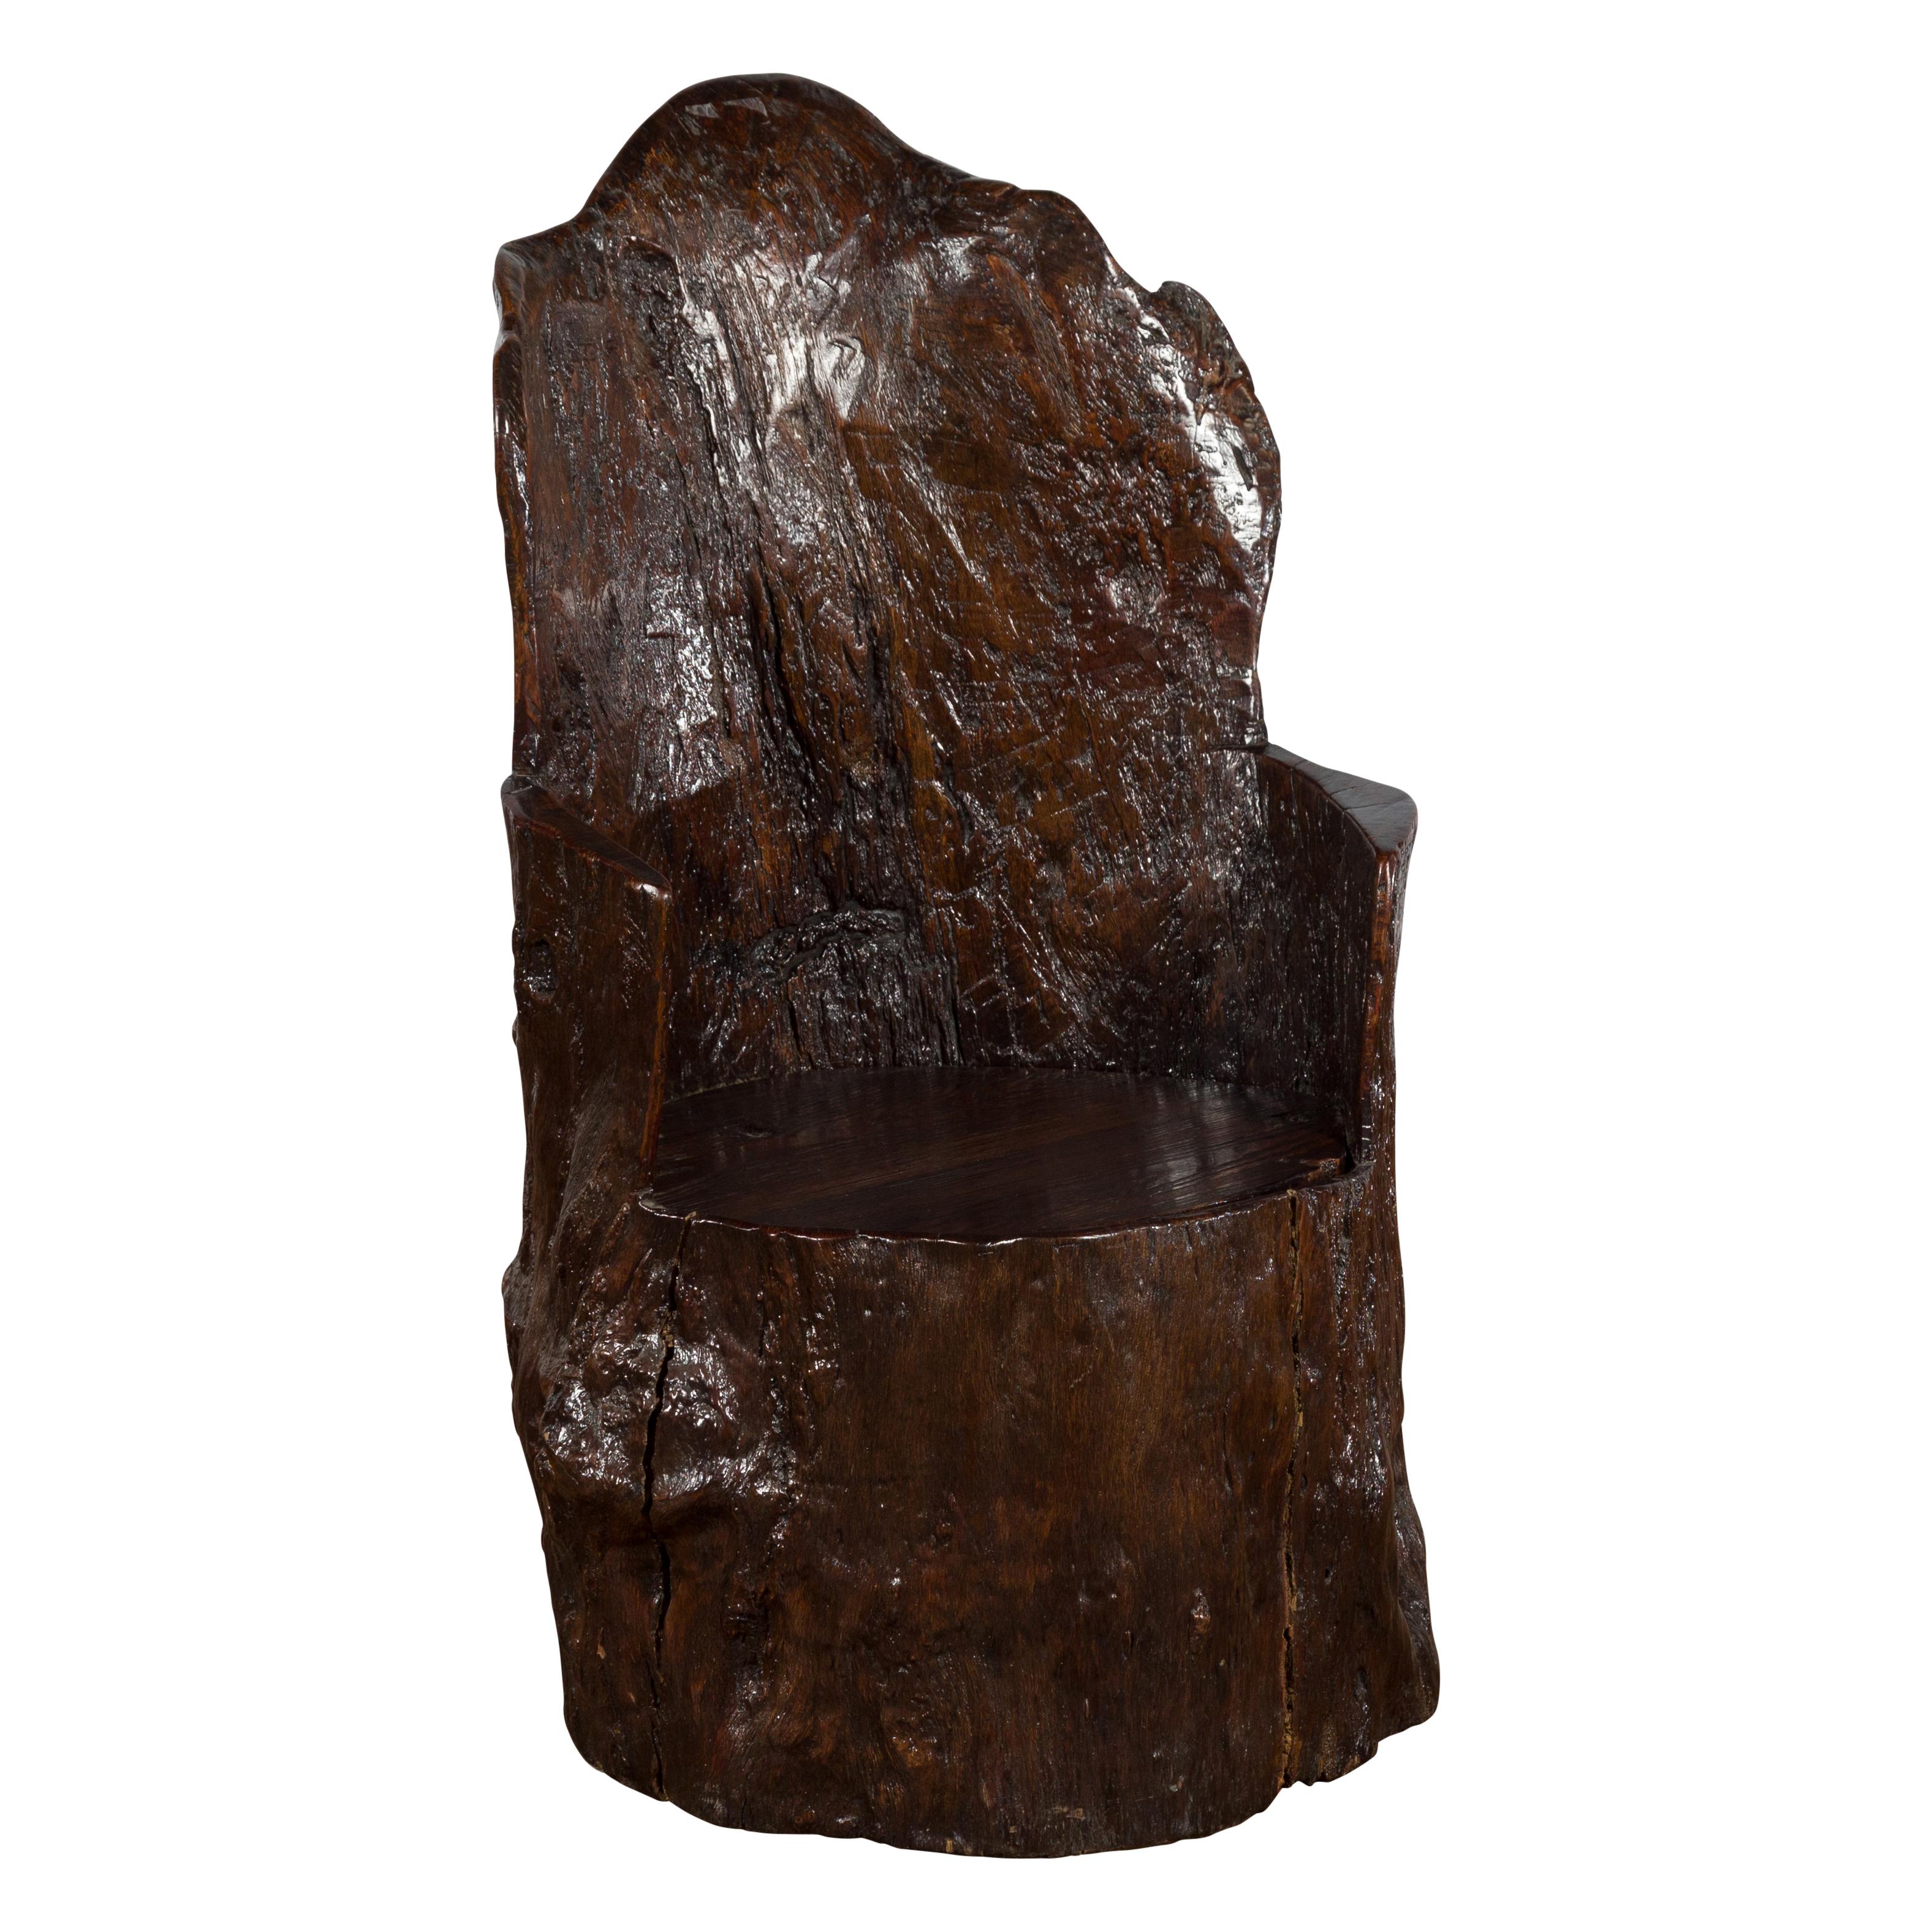 Rustic Cantonese Armchair Carved from a Tree Trunk with Hidden Compartment 8